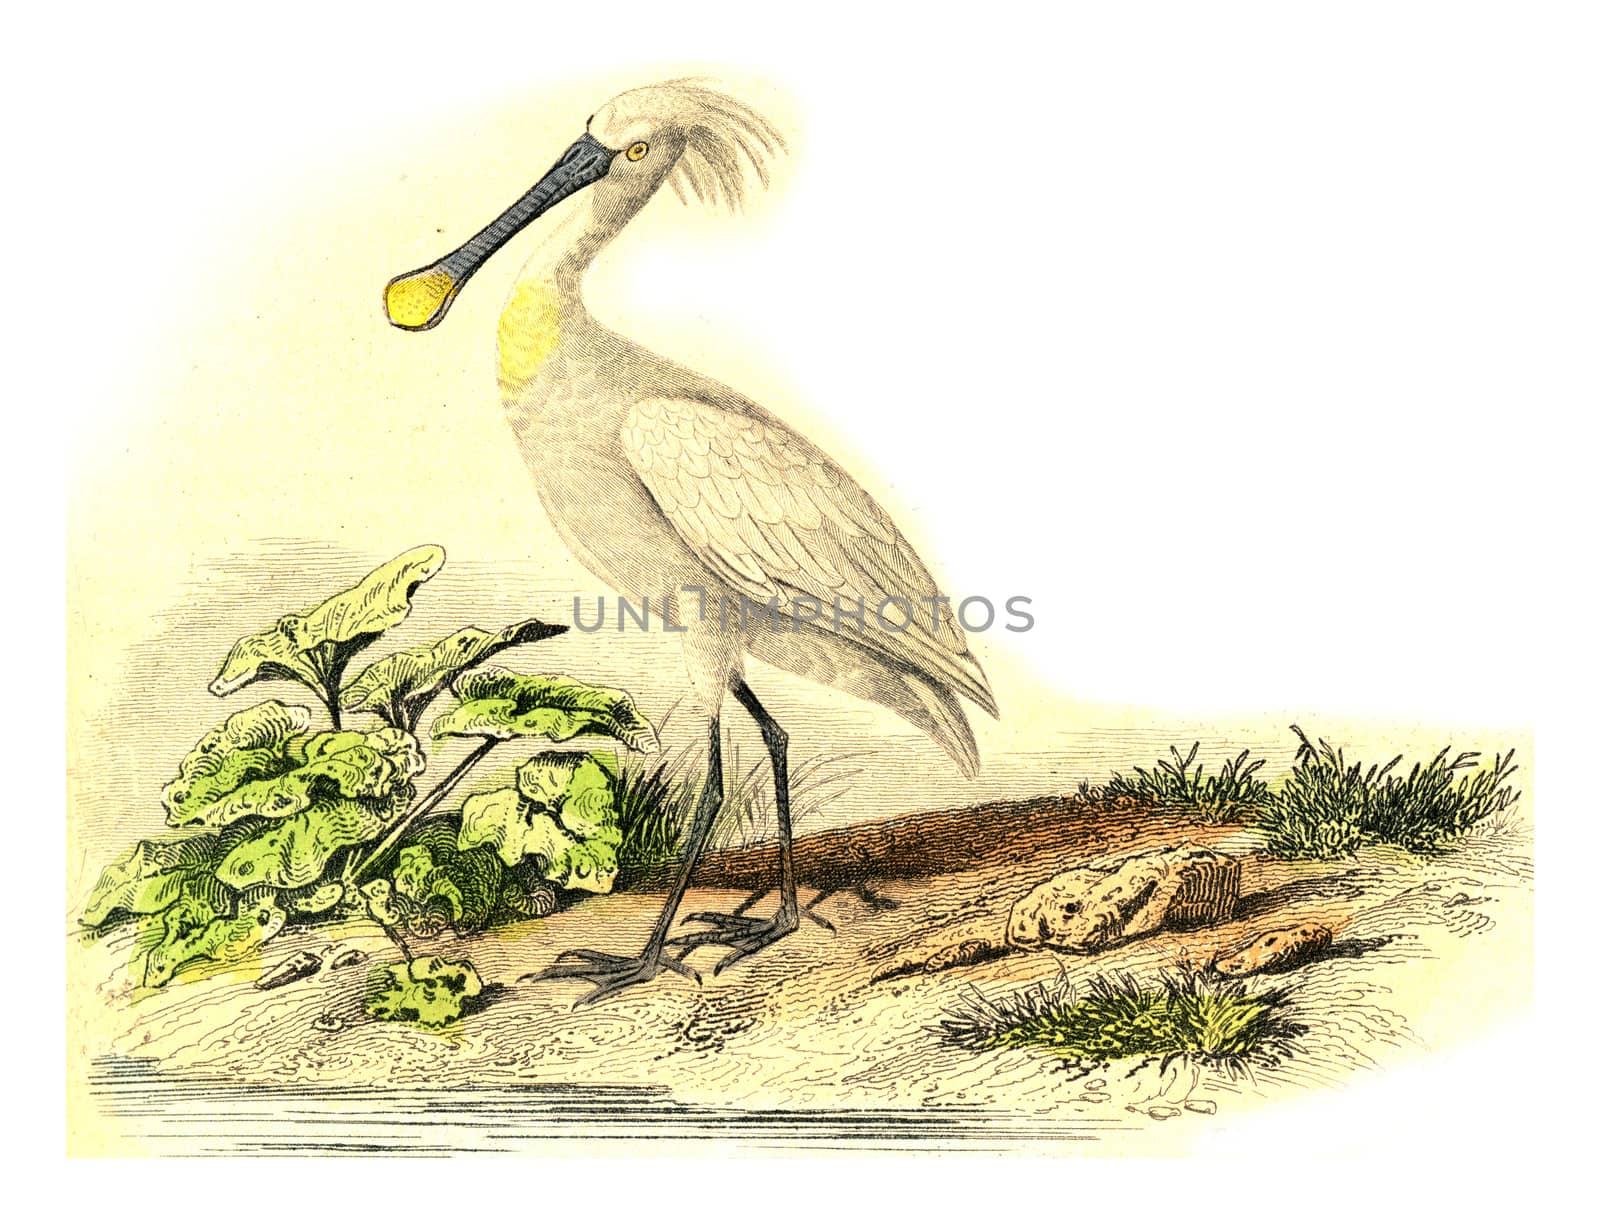 The spatuletail, vintage engraved illustration. From Buffon Complete Work.
